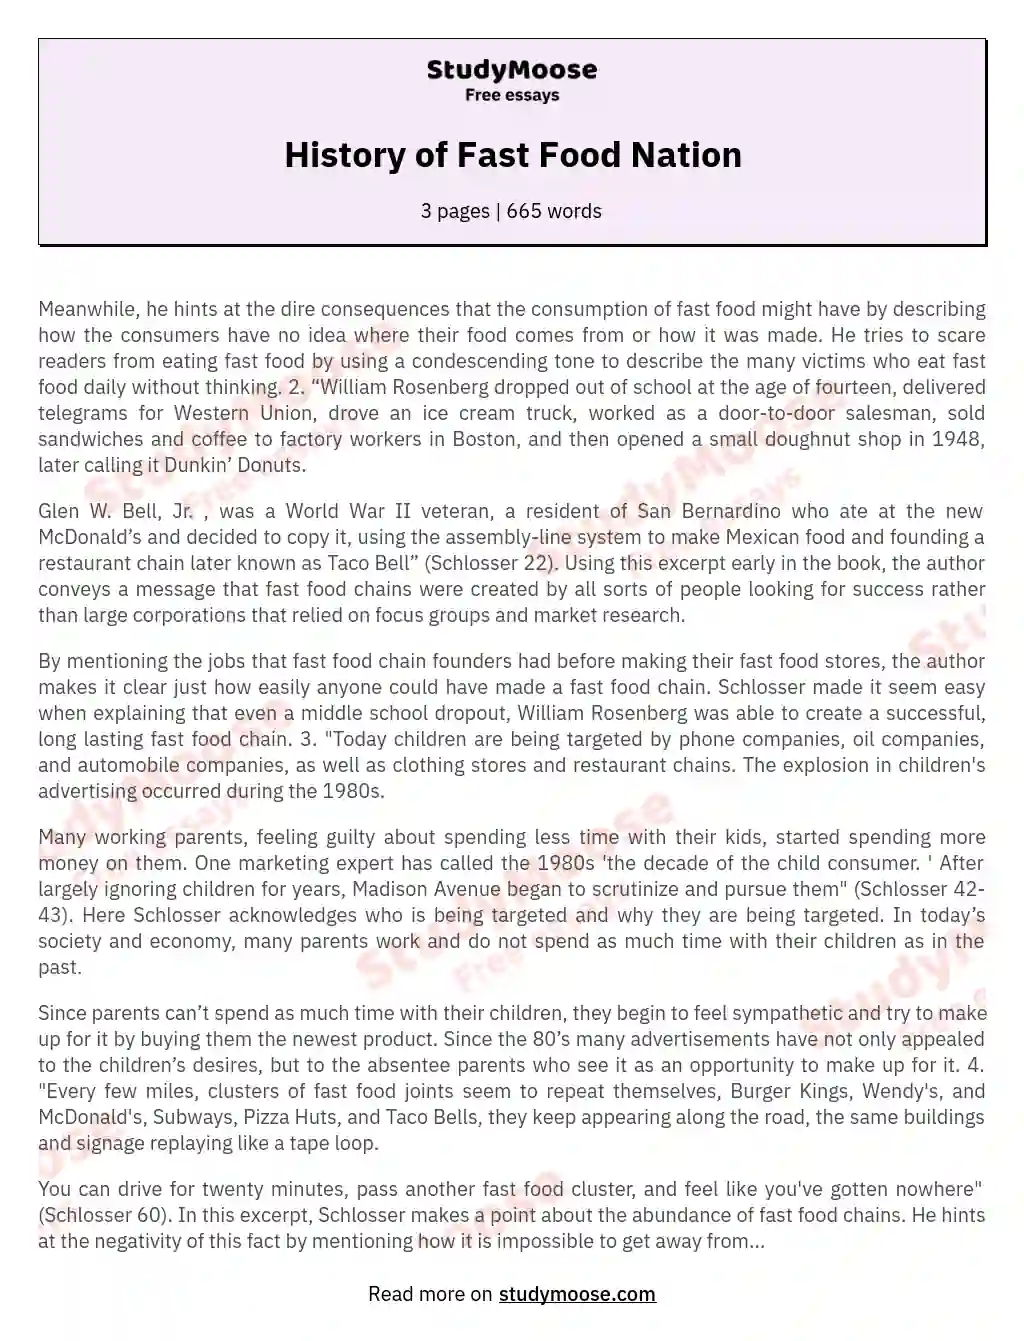 History of Fast Food Nation essay